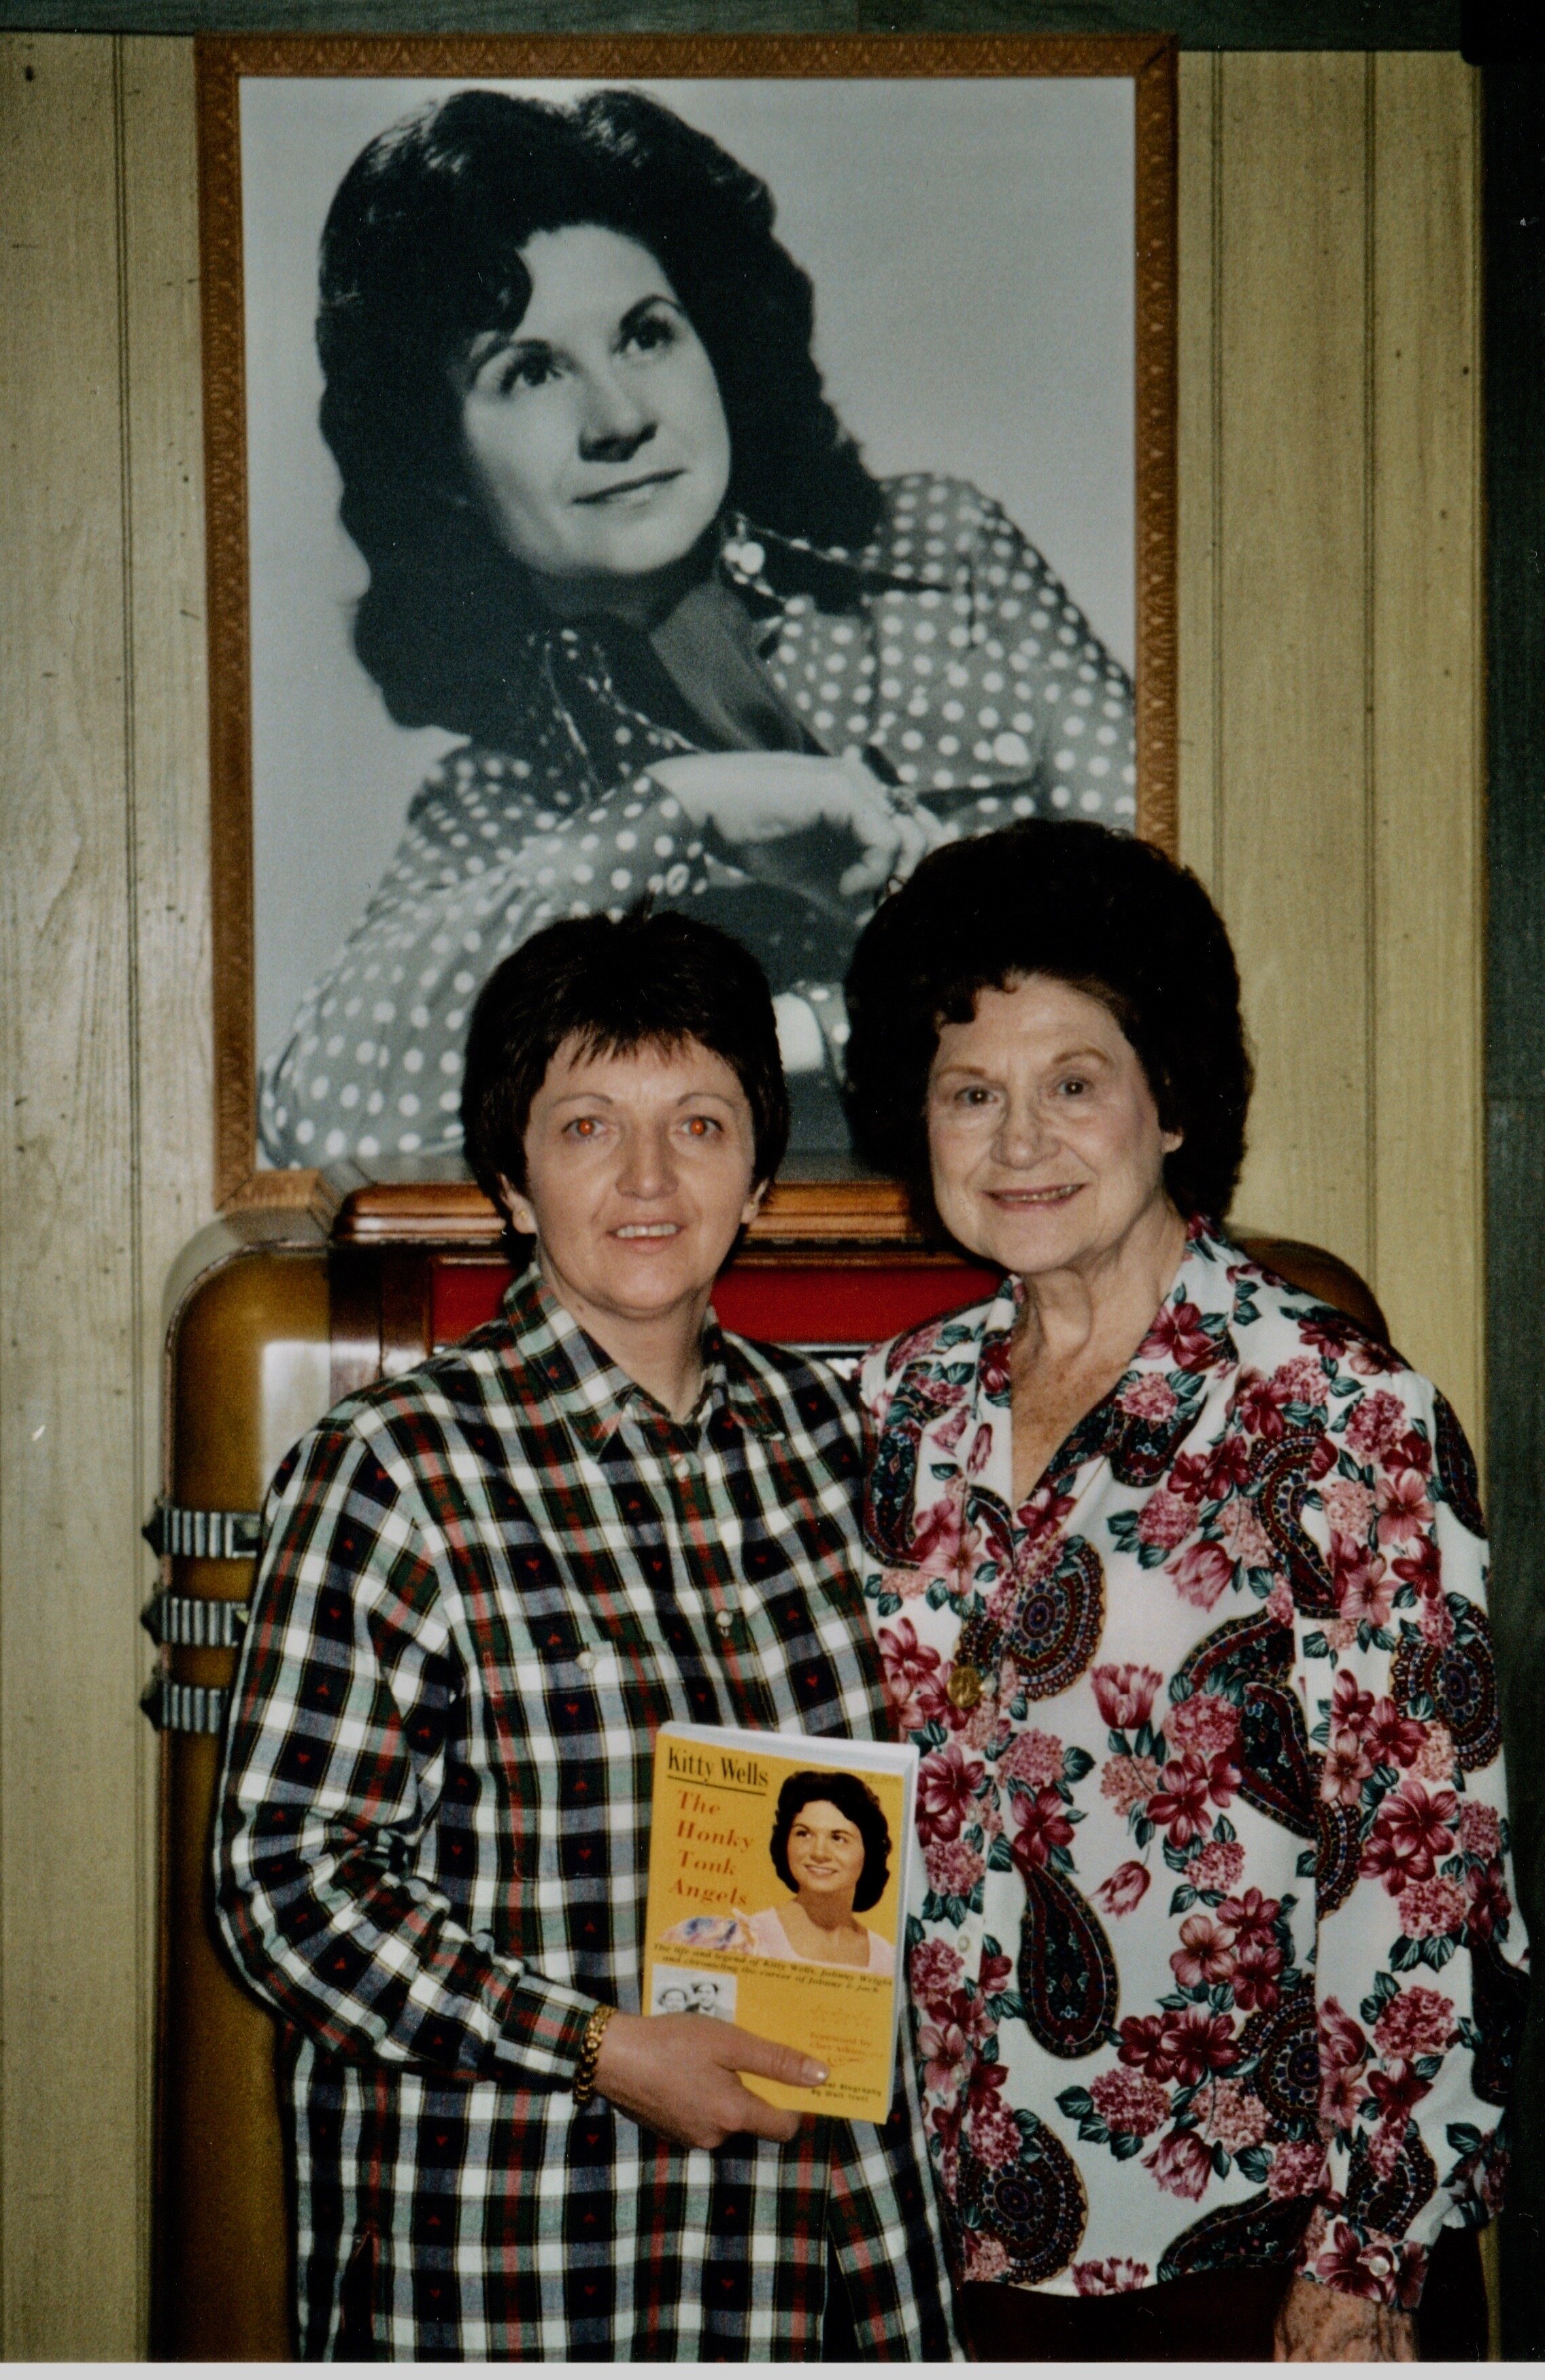  A visit with Miss Kitty Wells 